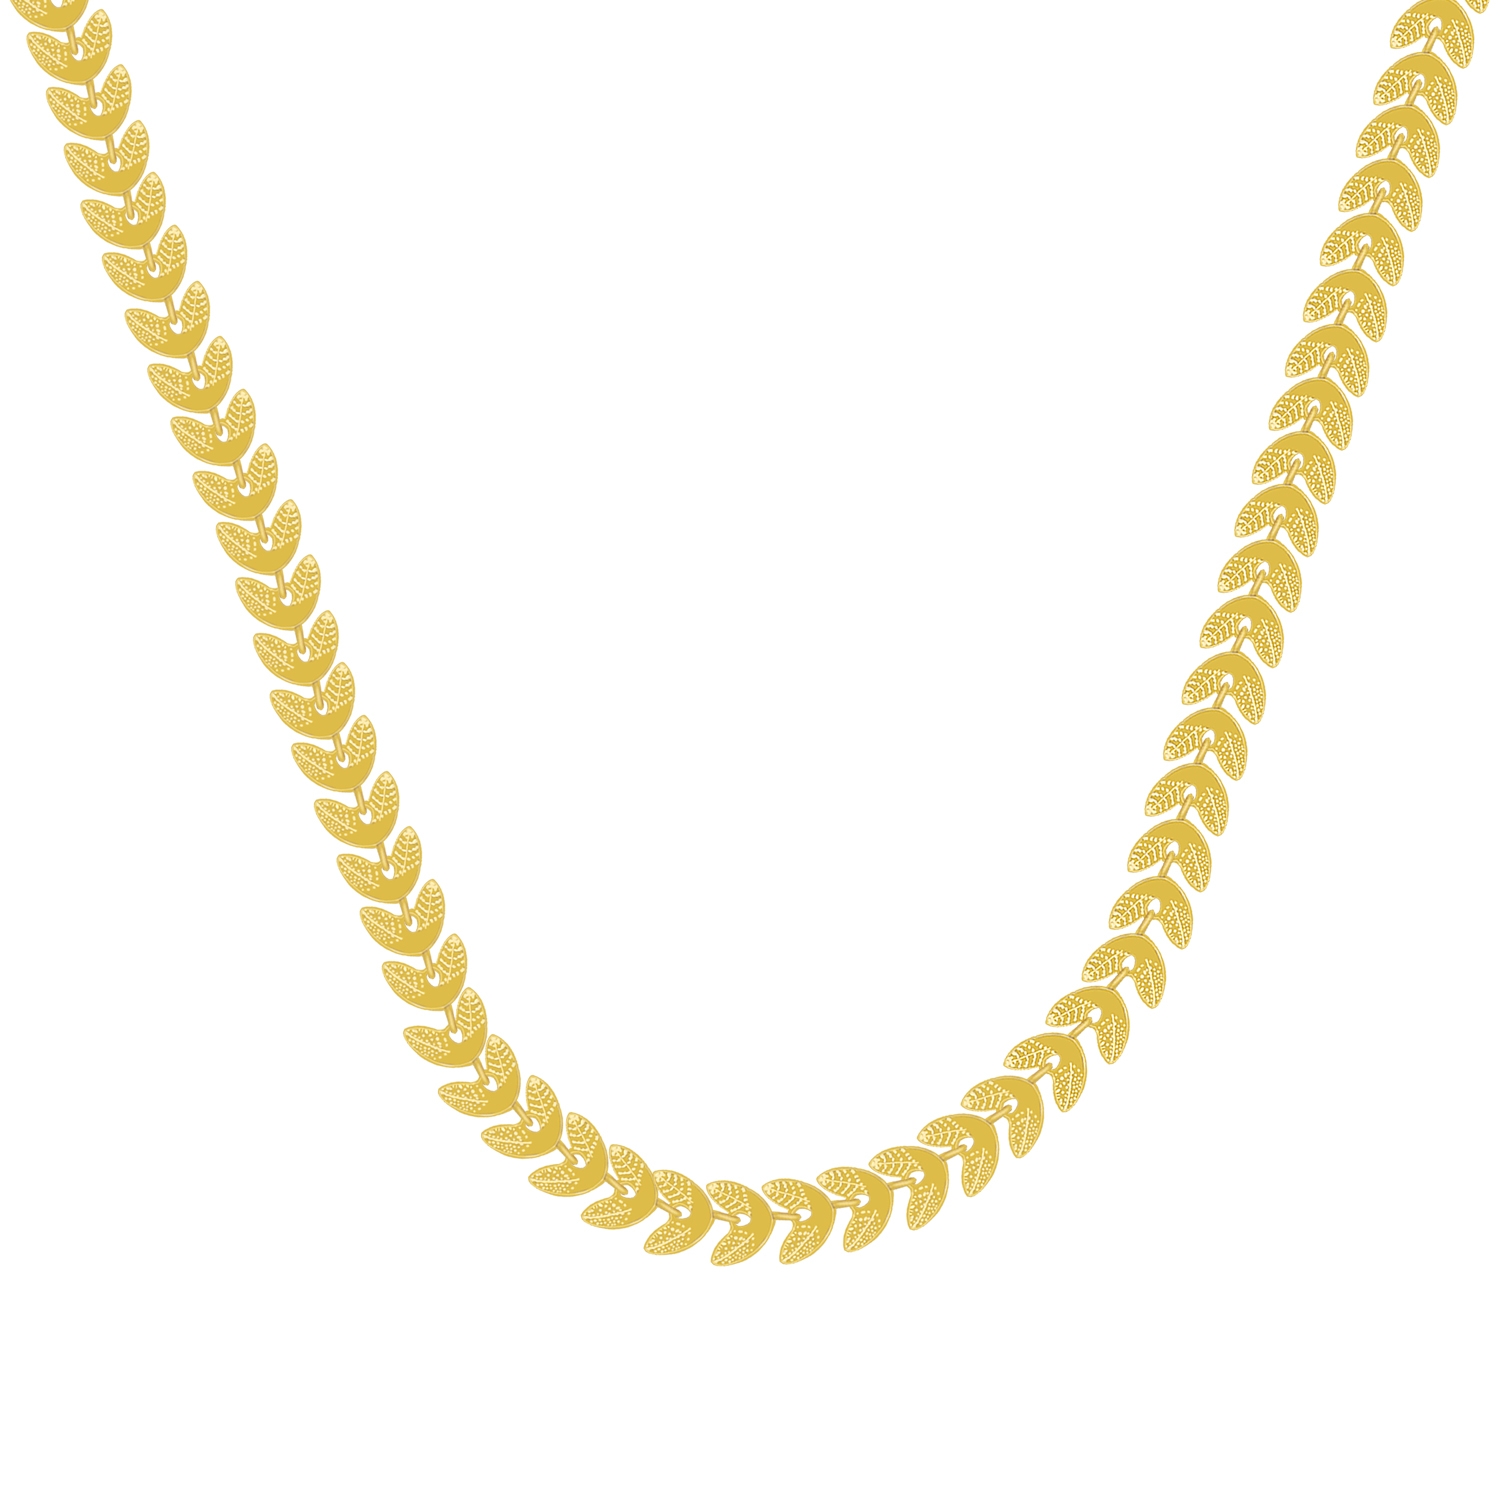 Paola Jewels | Paola Delicated Stylish Gold Chain For Women Girls  4